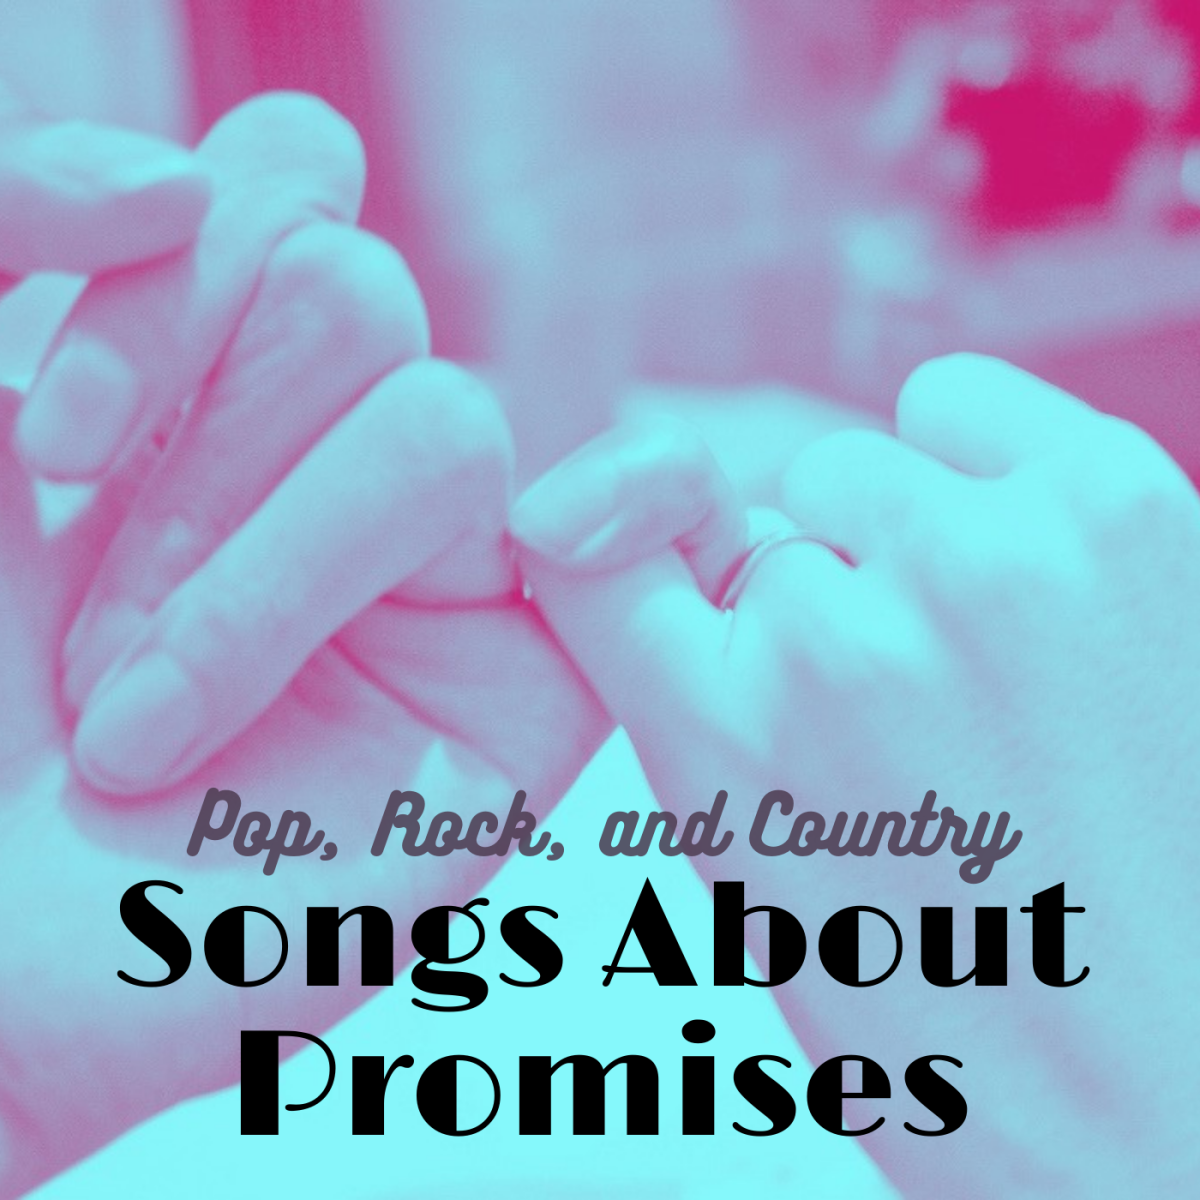 Do you honor your promises? Trust is fragile. Make a playlist of pop, rock, and country songs about promises both kept and broken.